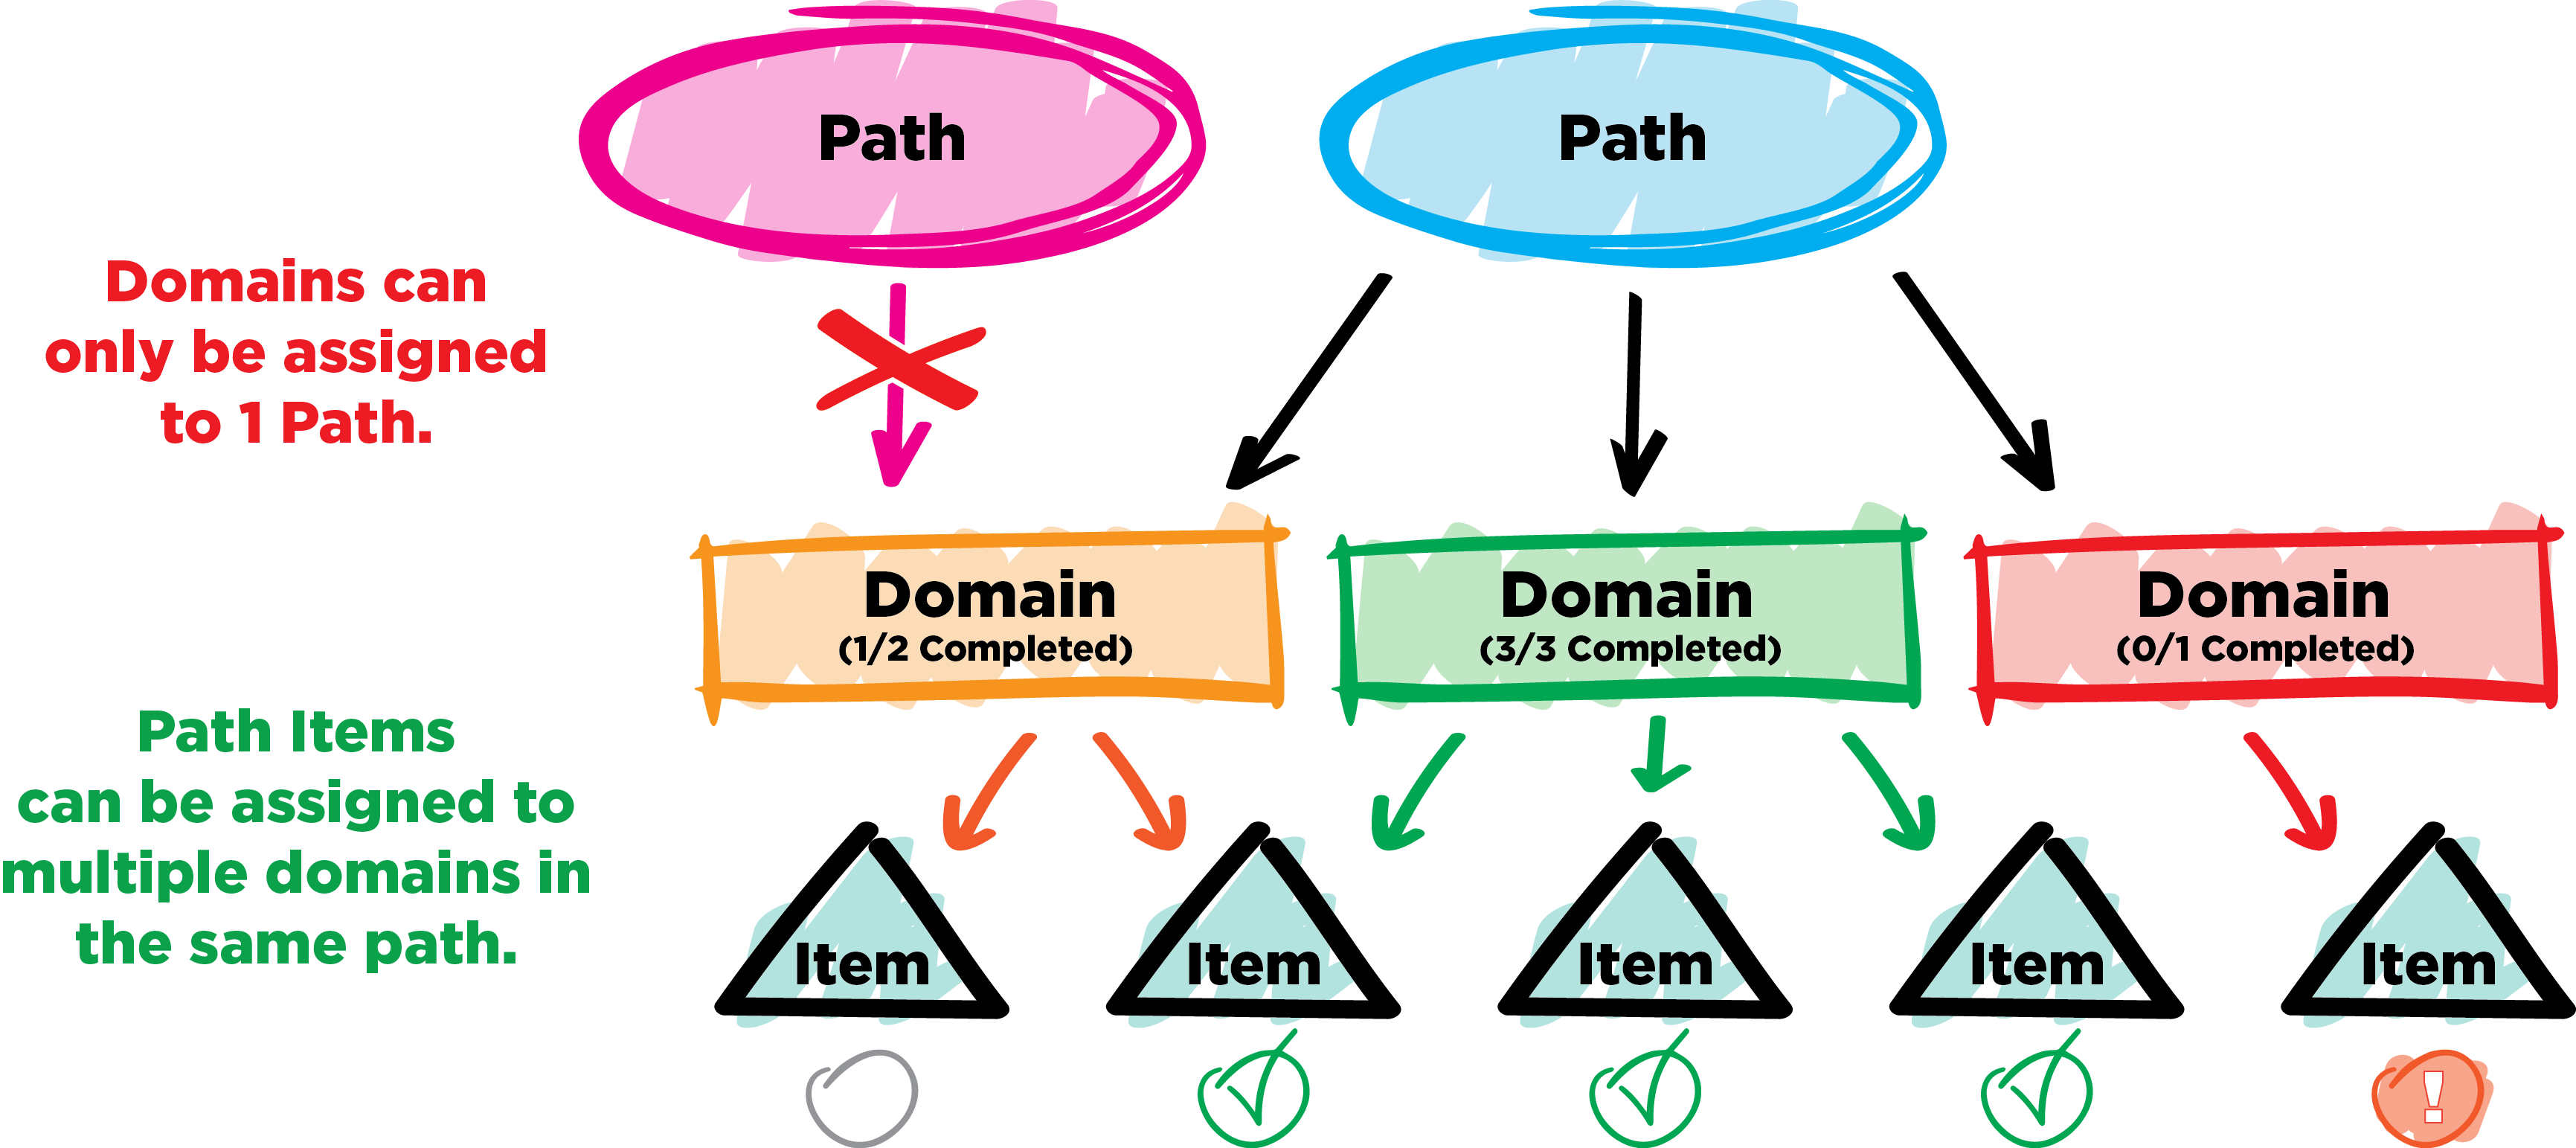 The graphic shows a path with three domains and multiple items, one of which is shared between multiple domains